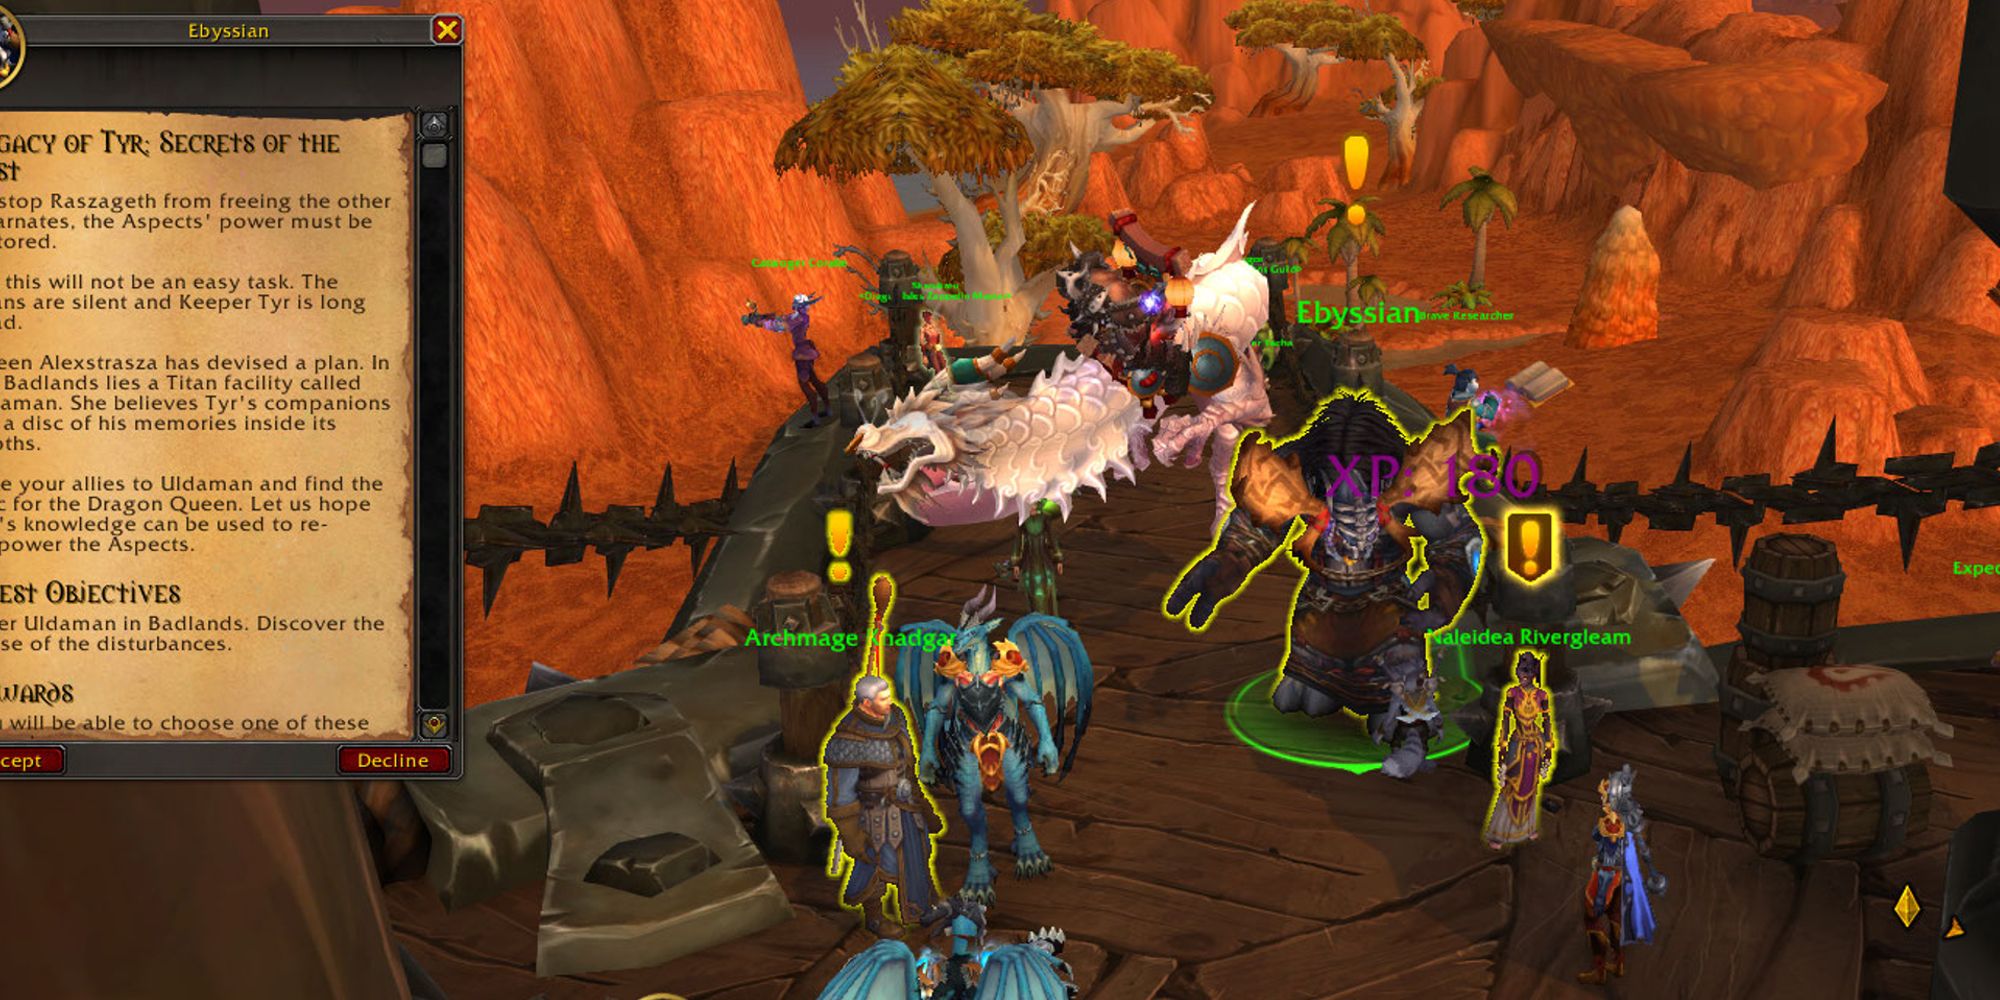 Blood Elf meets with pre-quest NPCs in World of Warcraft Dragonblight